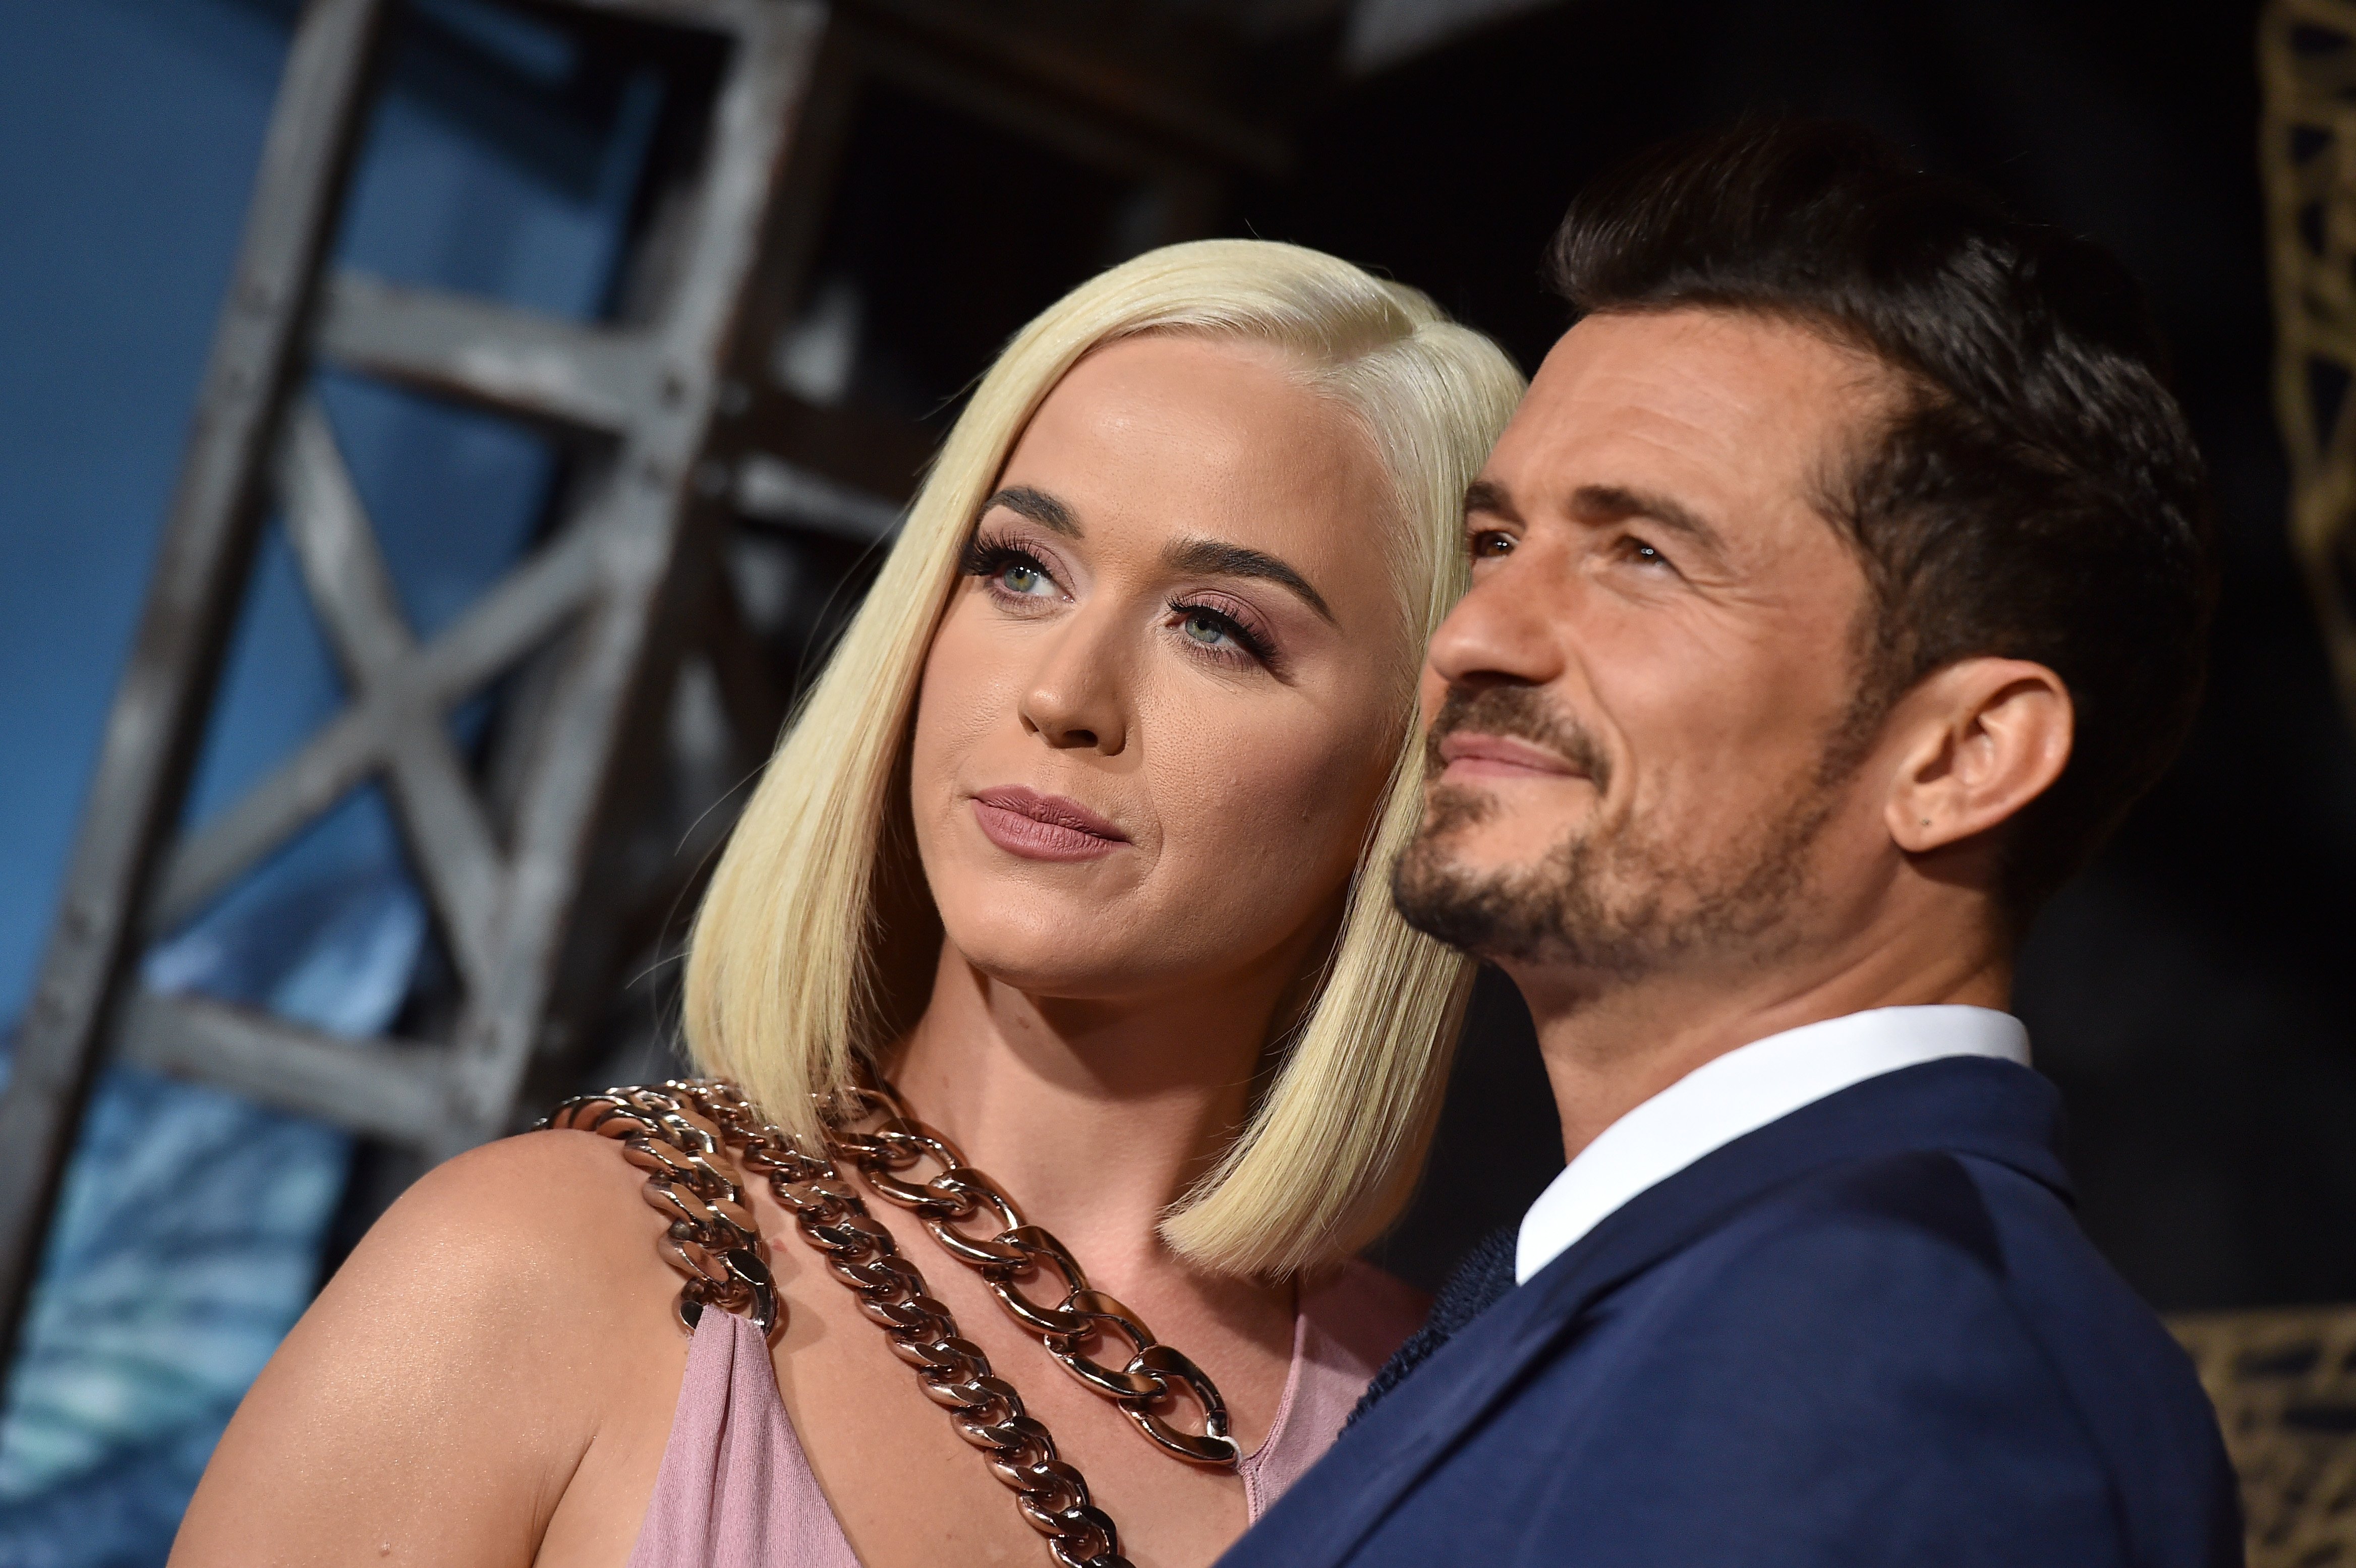 Katy Perry and Orlando Bloom attend the LA Premiere of "Carnival Row" on August 21, 2019, in Hollywood, California. | Source: Getty Images.